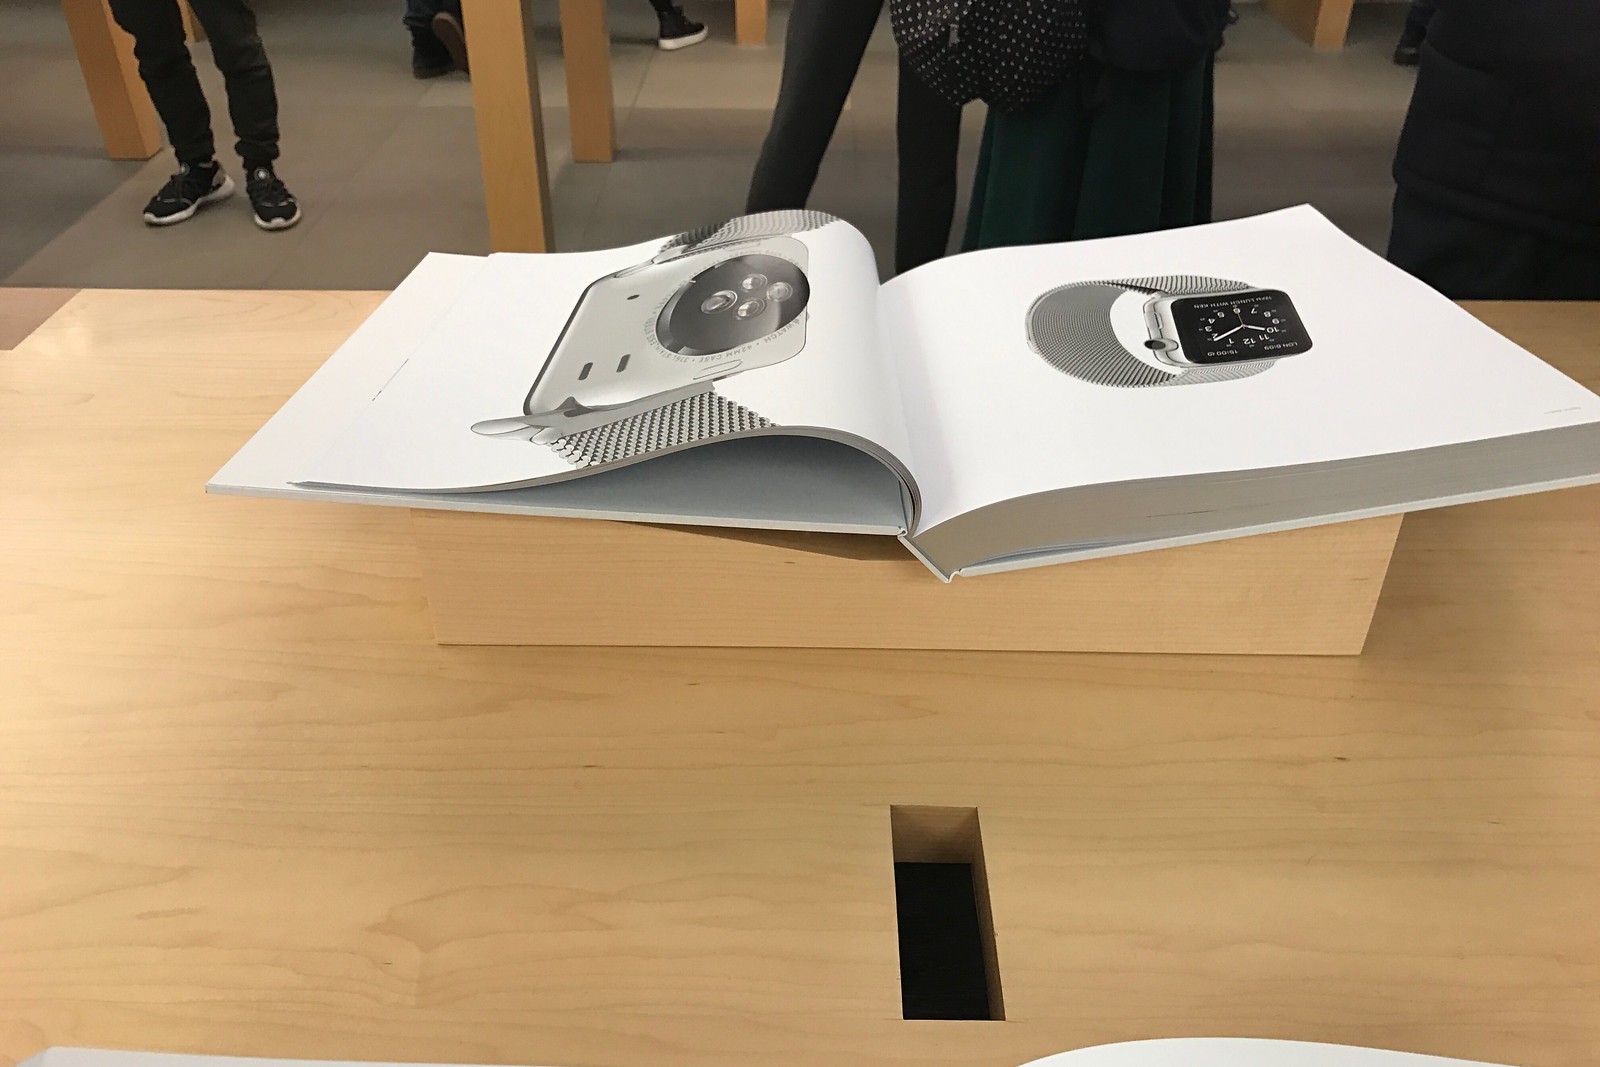 The Book "Design by Apple in California".